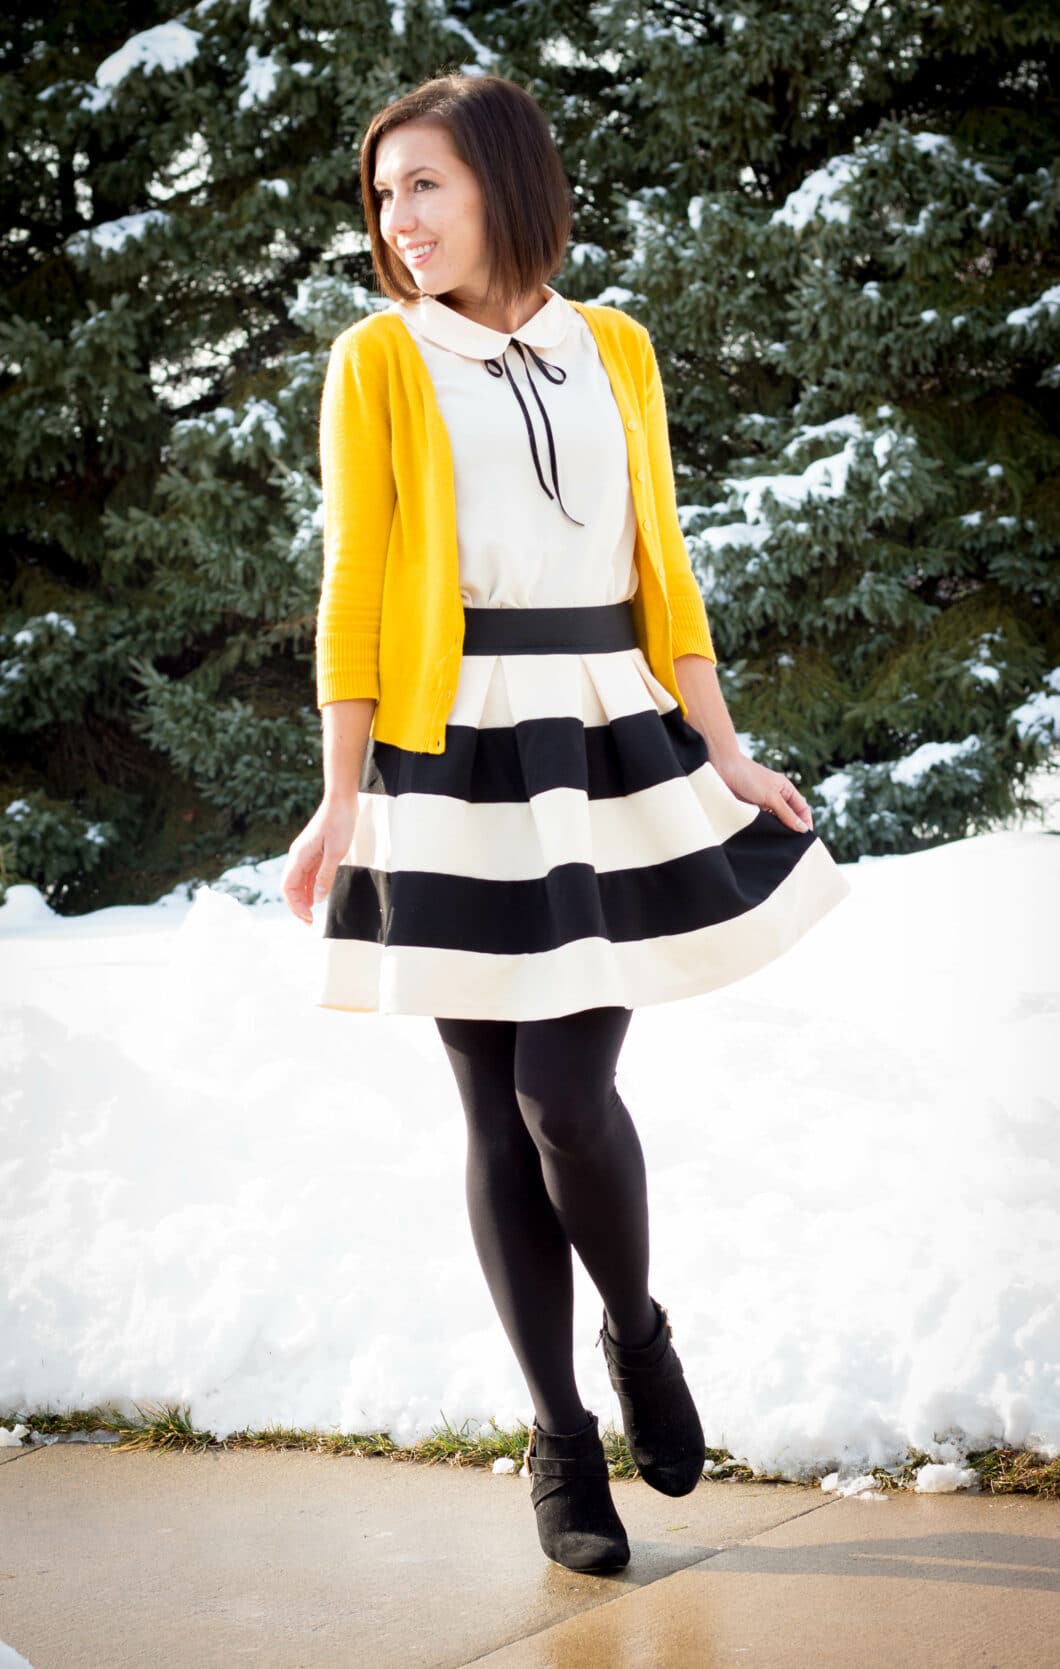 Lindsey wearing a striped mini skirt, cream blouse with a yellow cardigan, black tights, and ankle boots